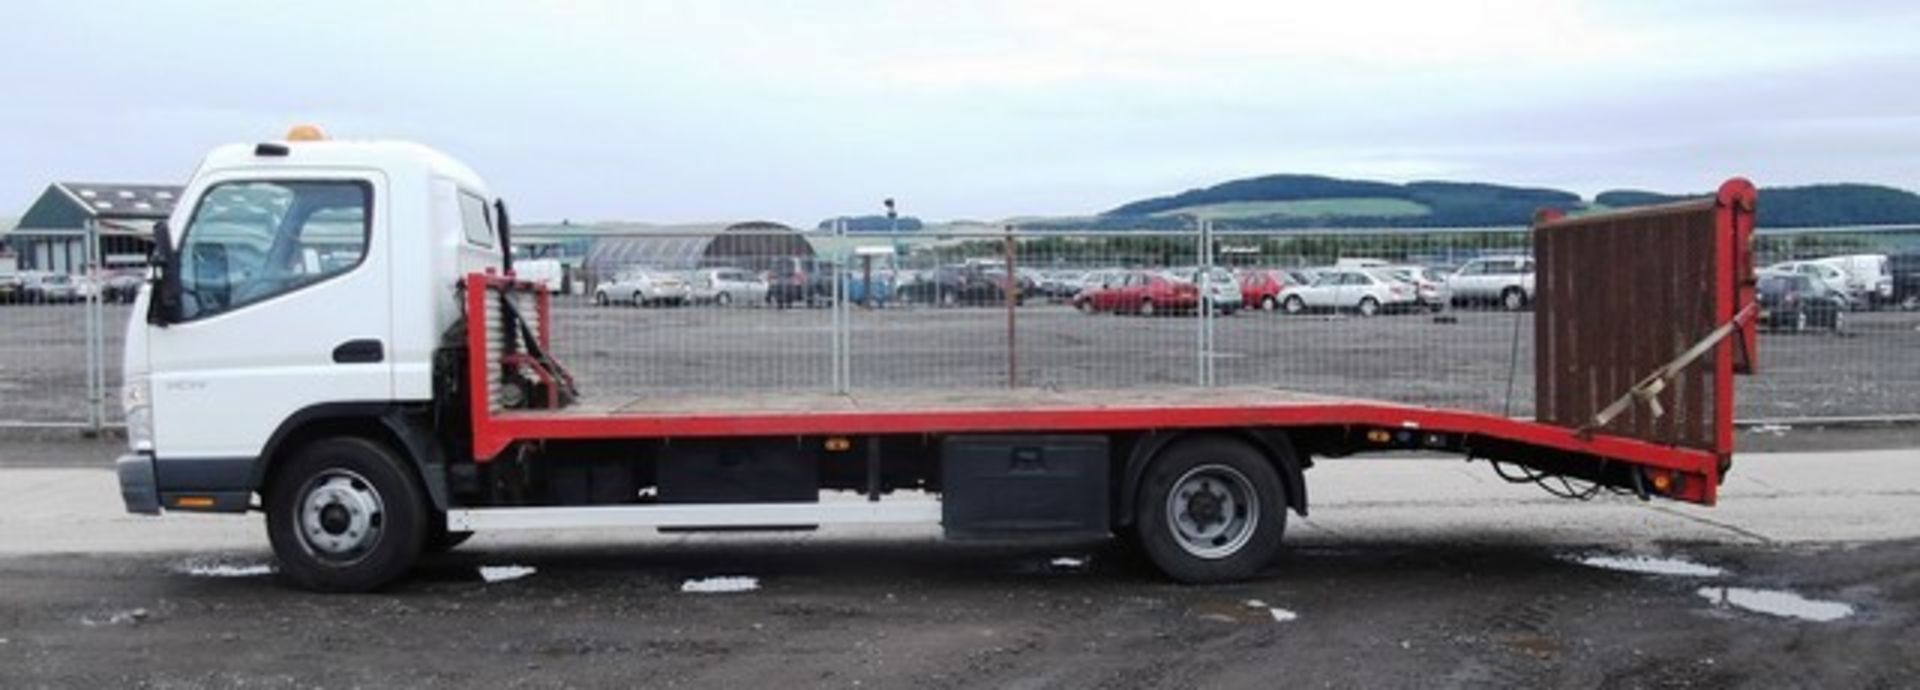 MITSUBISHI CANTER 75 7C14 - 3908cc
Body: 2 Dr Truck
Color: White
First Reg: 01/09/2005
Doors: 2
MOT: - Image 4 of 16